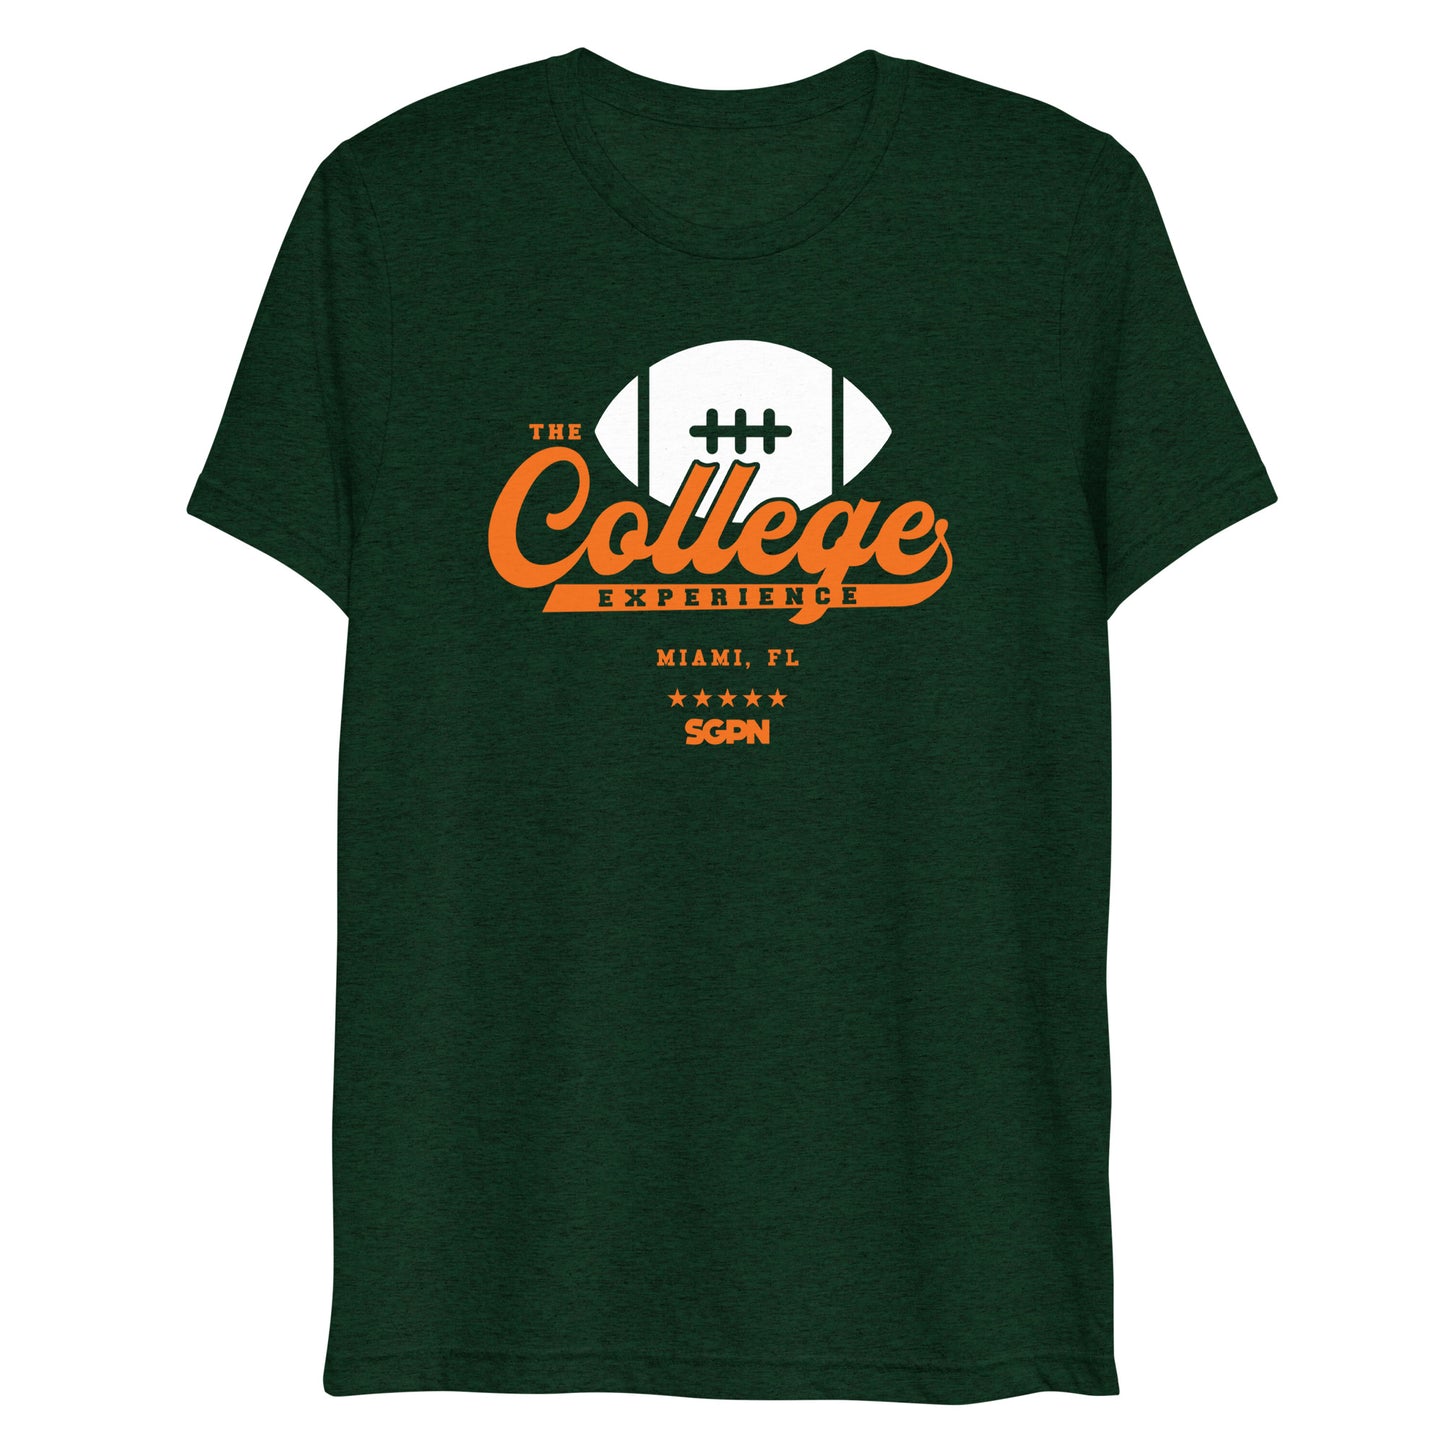 The College Football Experience - Miami edition - Emerald Short sleeve t-shirt